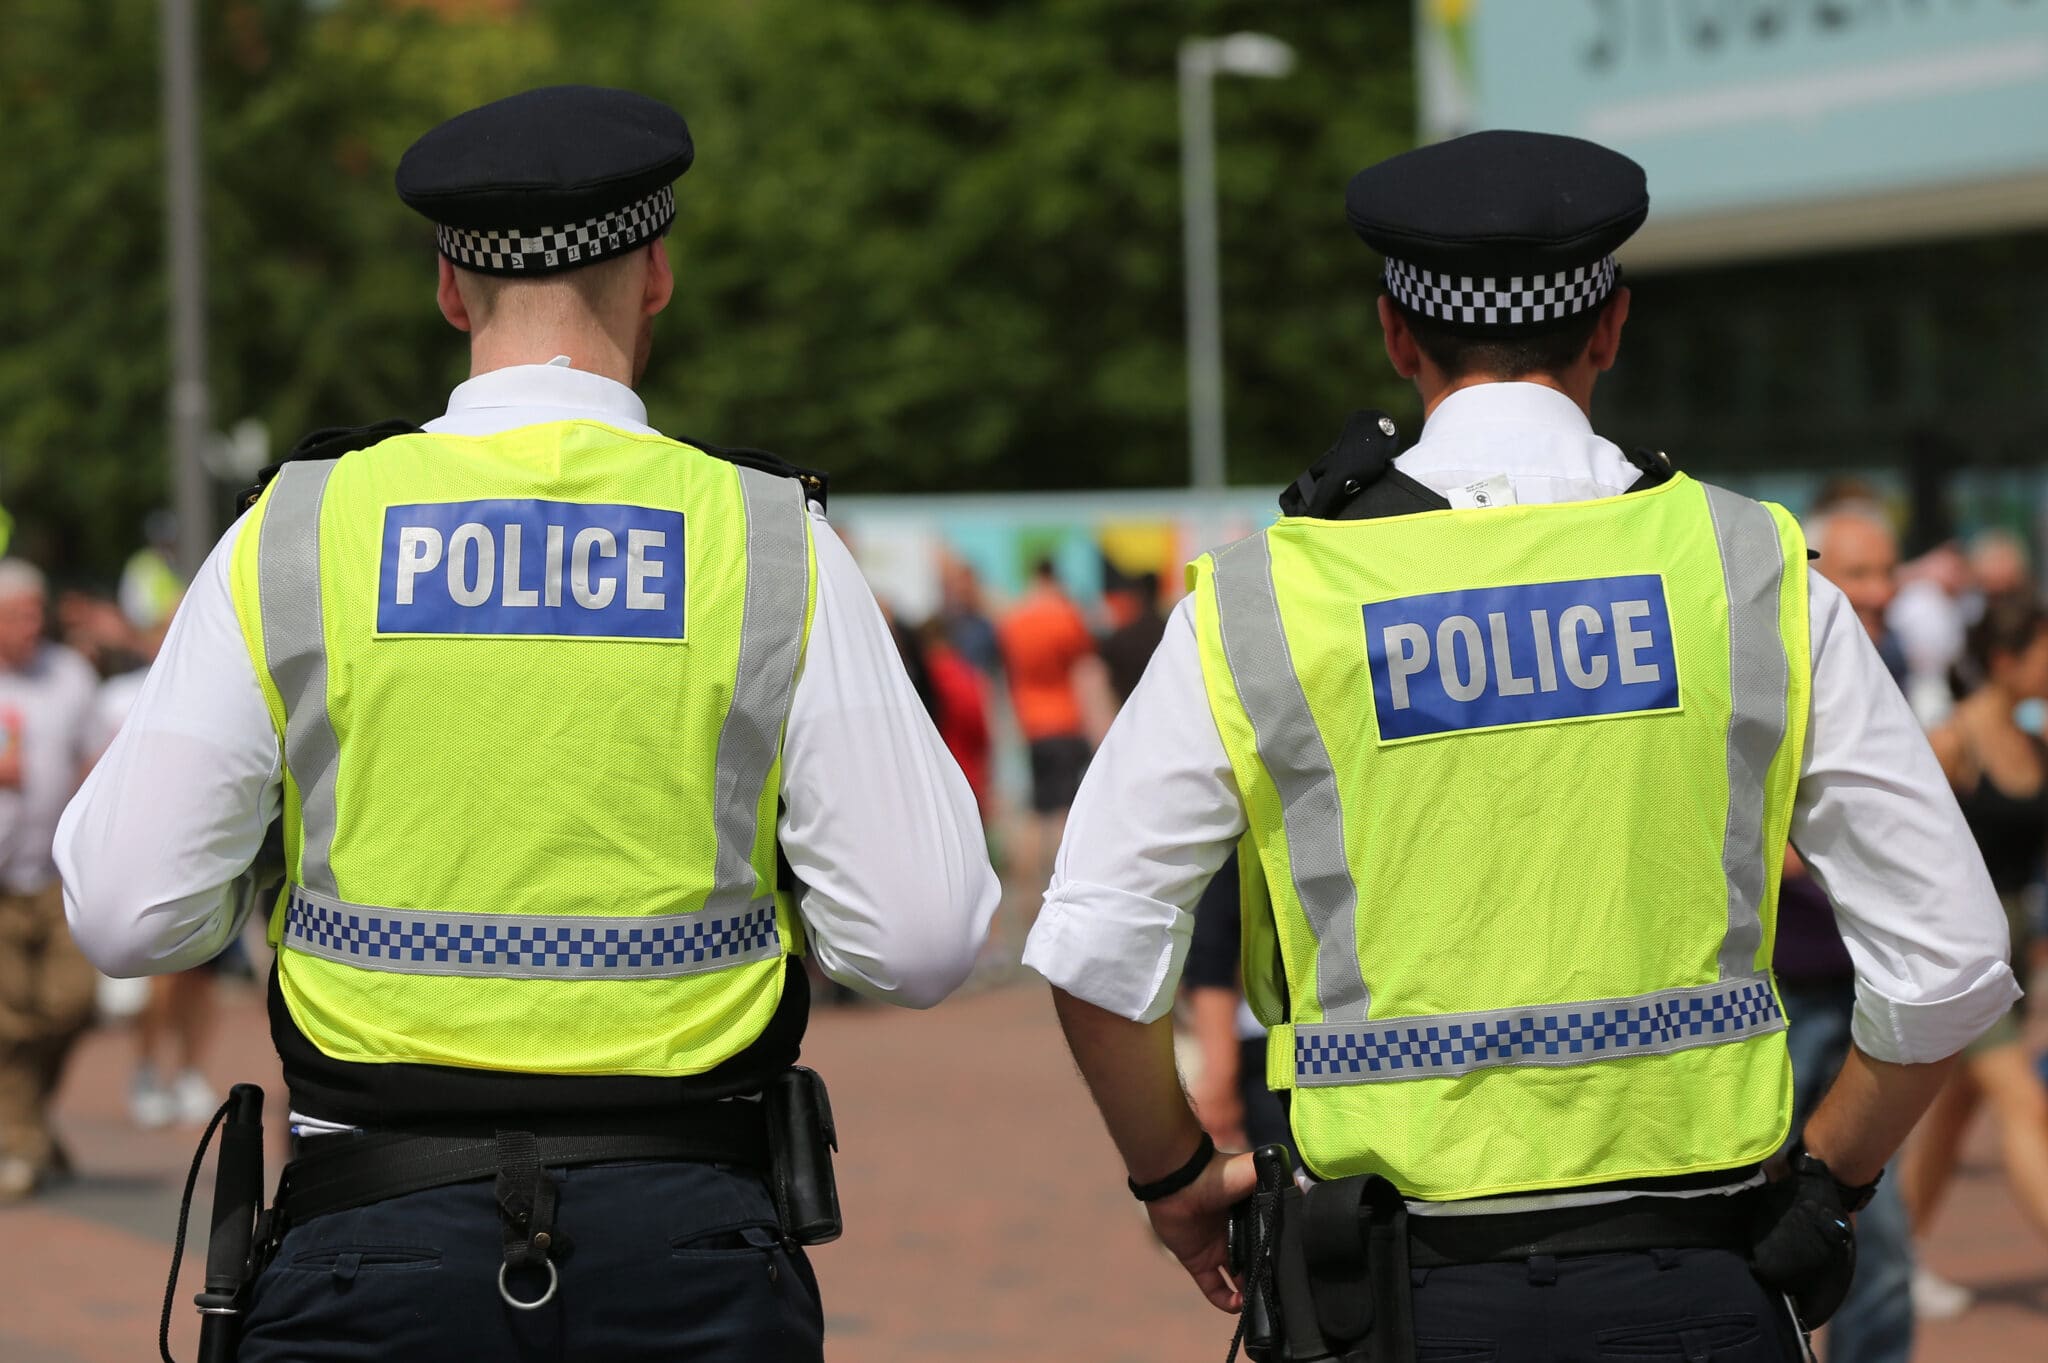 Yet another UK police officer investigated over 'racist, homophobic' texts